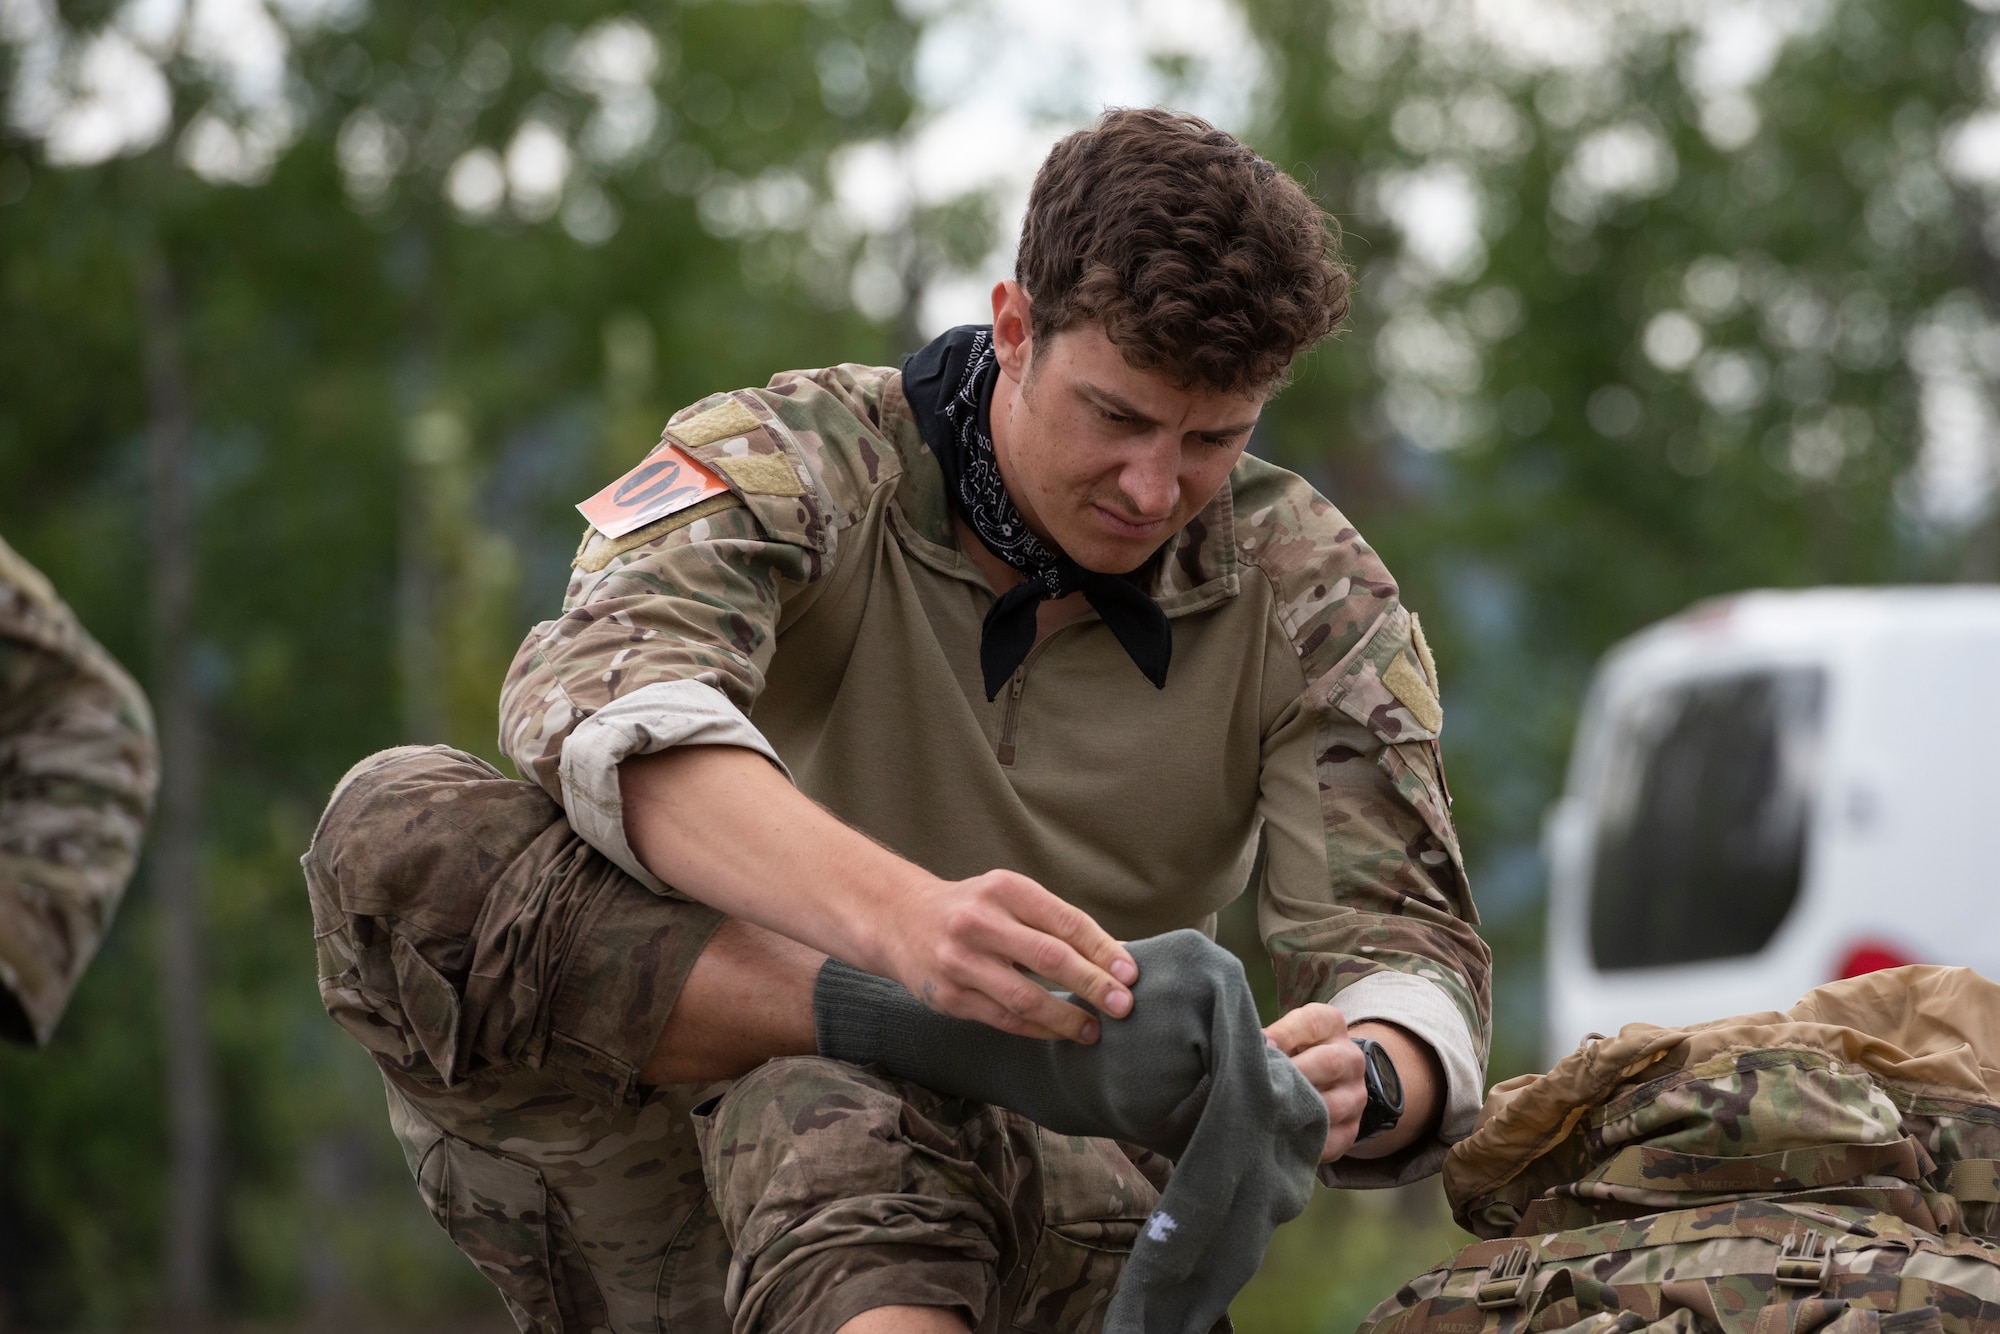 U.S. Air Force Staff Sgt. Garrett Geske, tactical air control party (TACP) specialist, 3rd Air Support Operations Squadron, changes his socks after completing a land navigation event during the Chaos Challenge 2021 at Joint Base Elmendorf-Richardson, Alaska, July 14, 2021. The Chaos Challenge 2021 was a multi-day series of mental and physical contests sponsored by the 1st Air Support Operations Group with participants from the 3rd, 5th, 25th, and 604th Air Support Operations Squadrons and a guest team from the 673d Security Forces Squadron. The winner of the competition will go on to compete in Lightning Challenge 2021 to determine the best two-man TACP team in the Air Force.